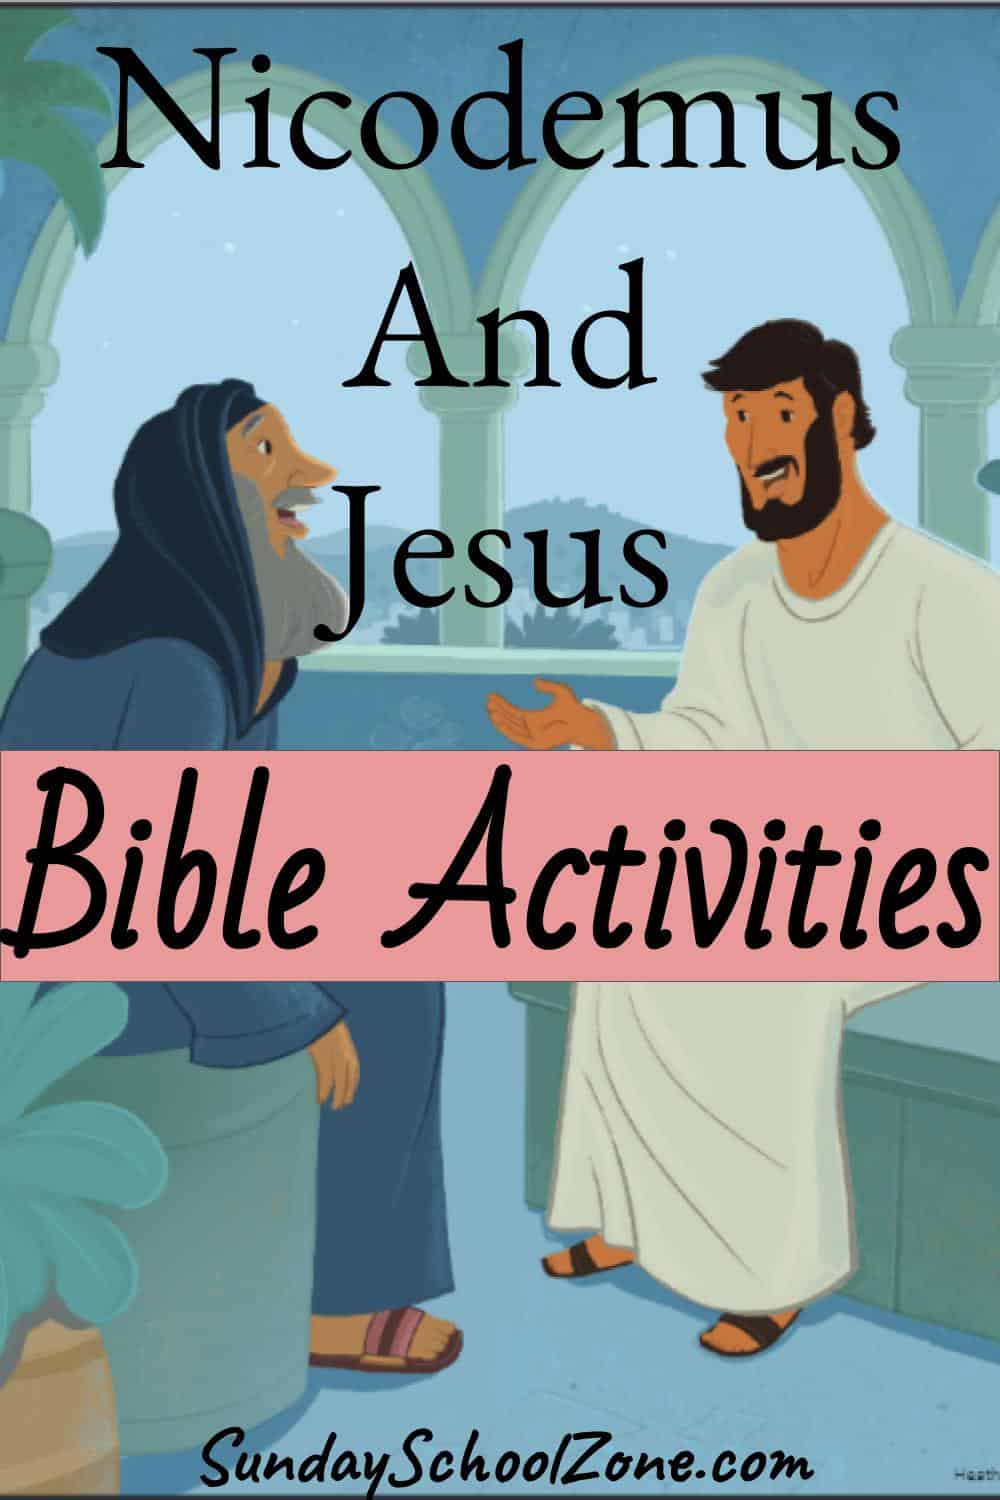 Jesus and Nicodemus Archives - Page 3 of 3 - Children's Bible ...